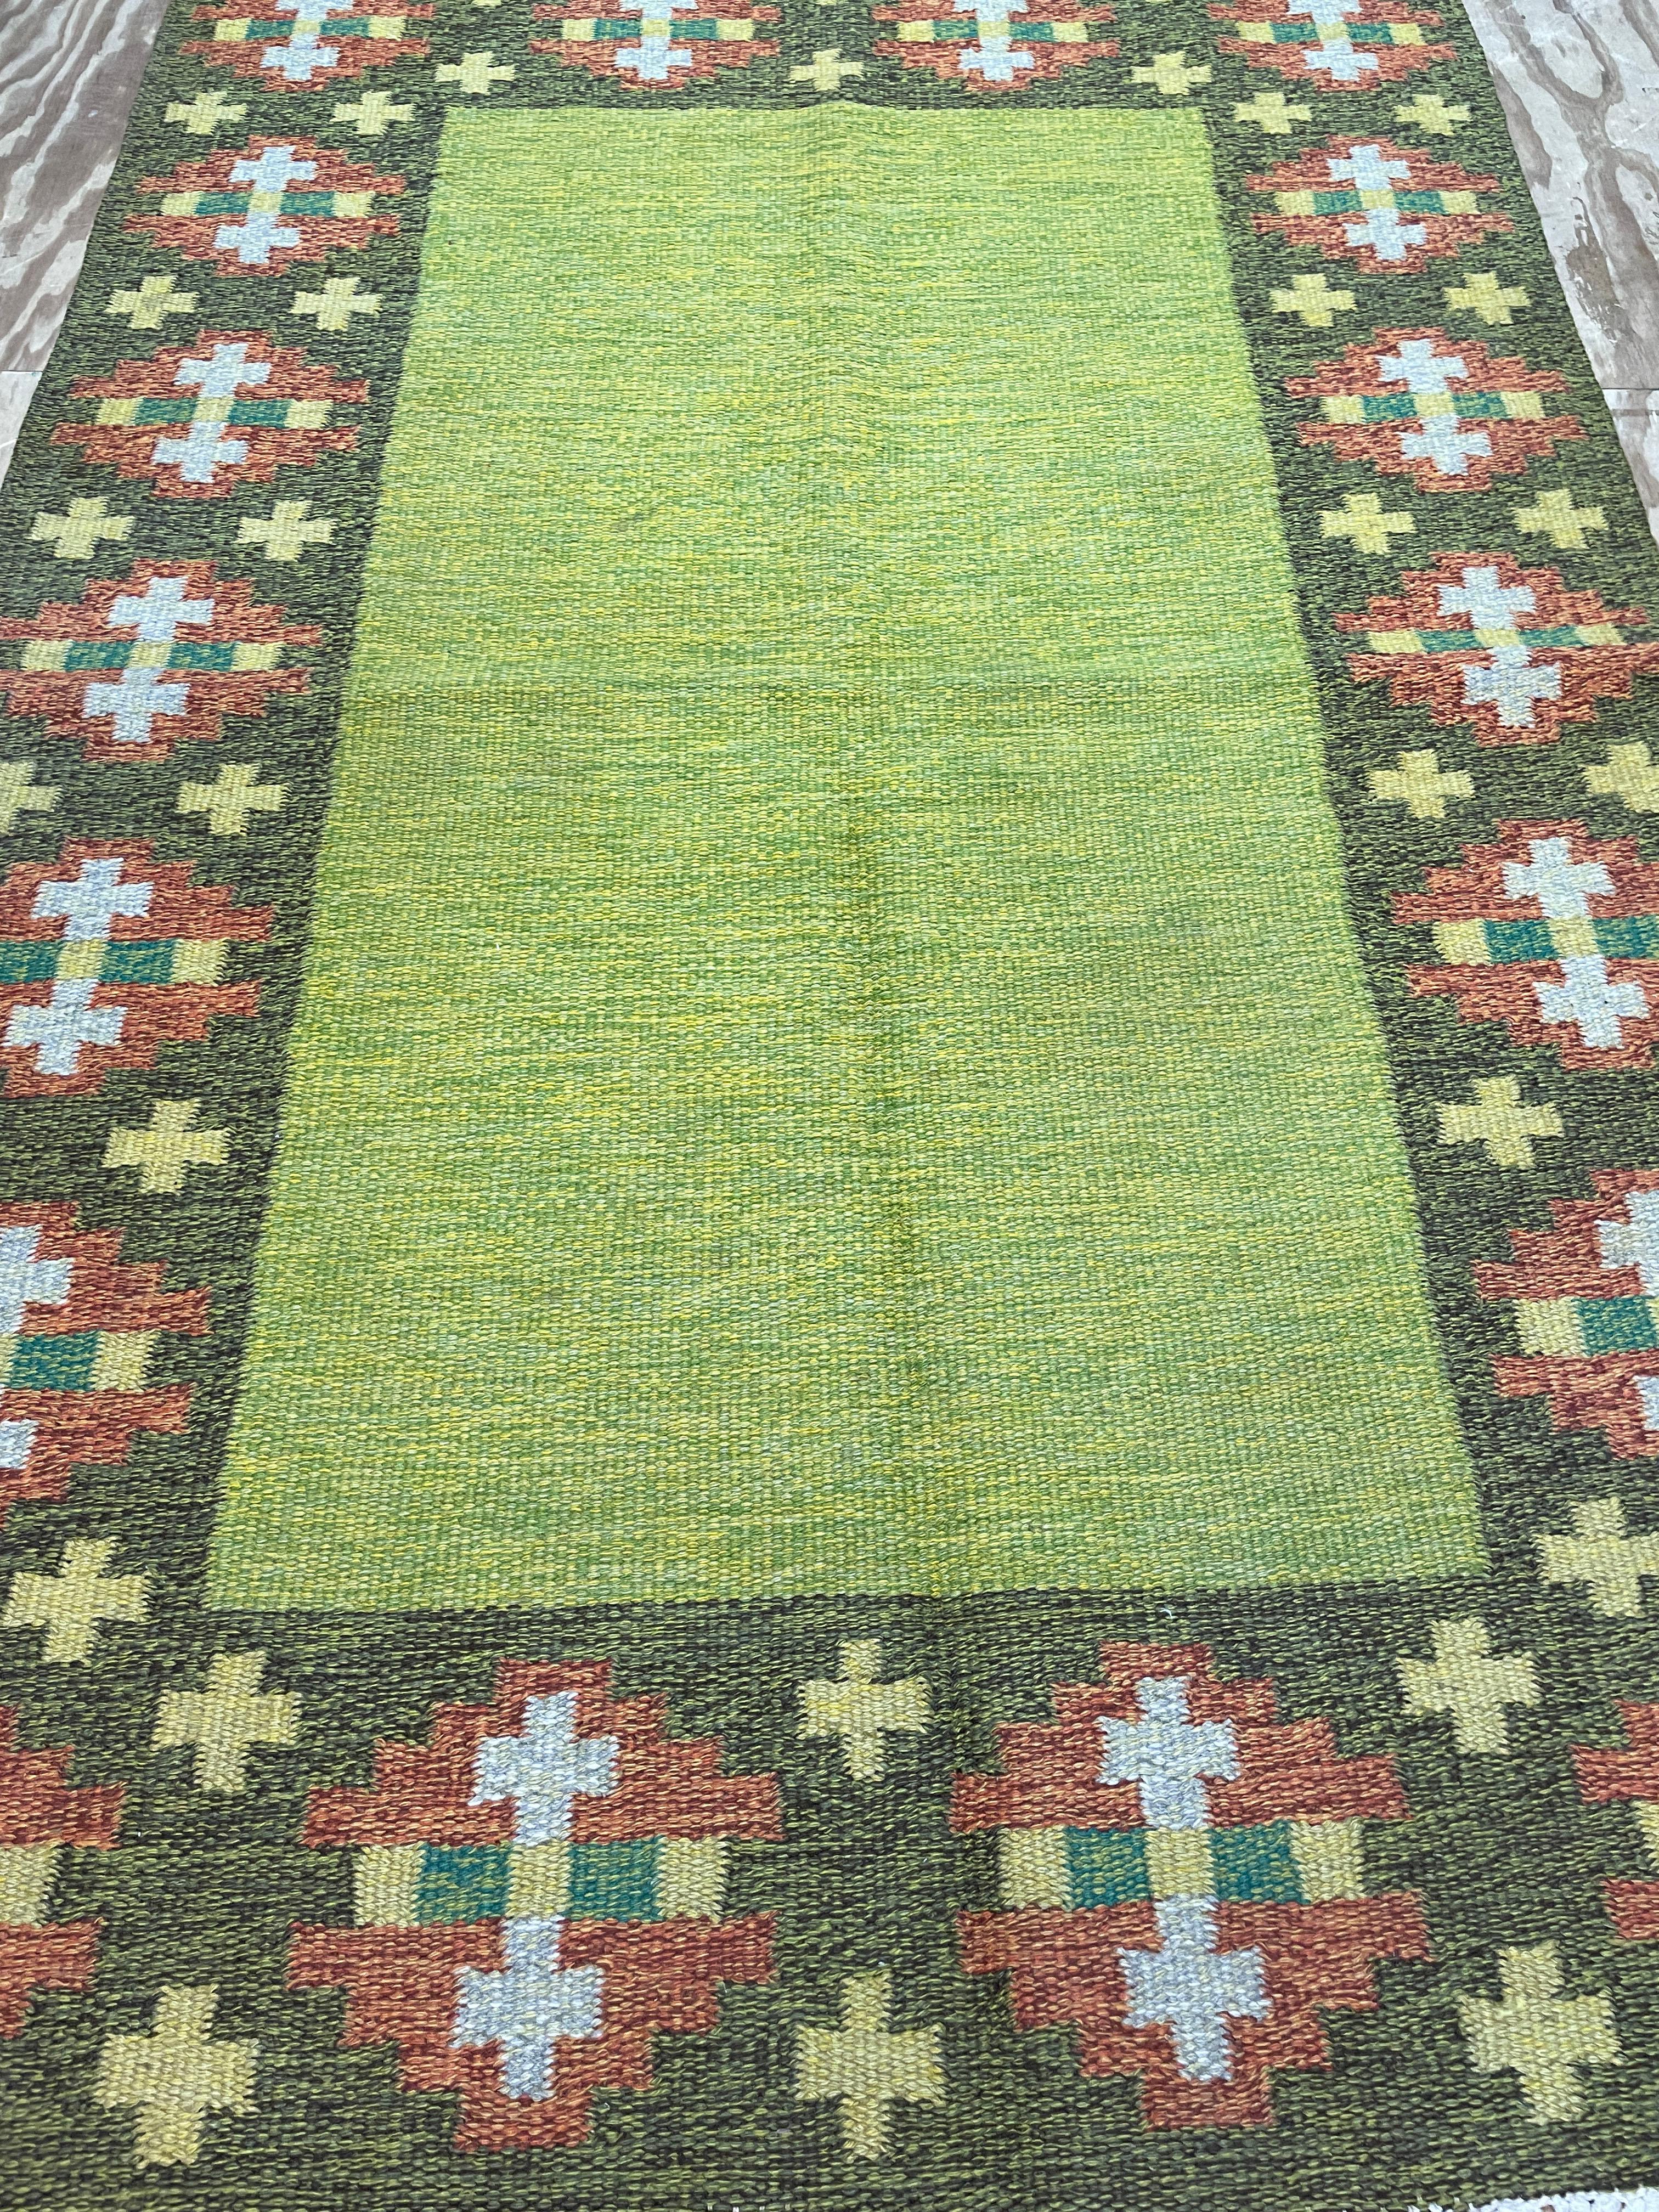 Vintage Swedish Flat-Weave Carpet, 20th Century In Excellent Condition For Sale In Evanston, IL